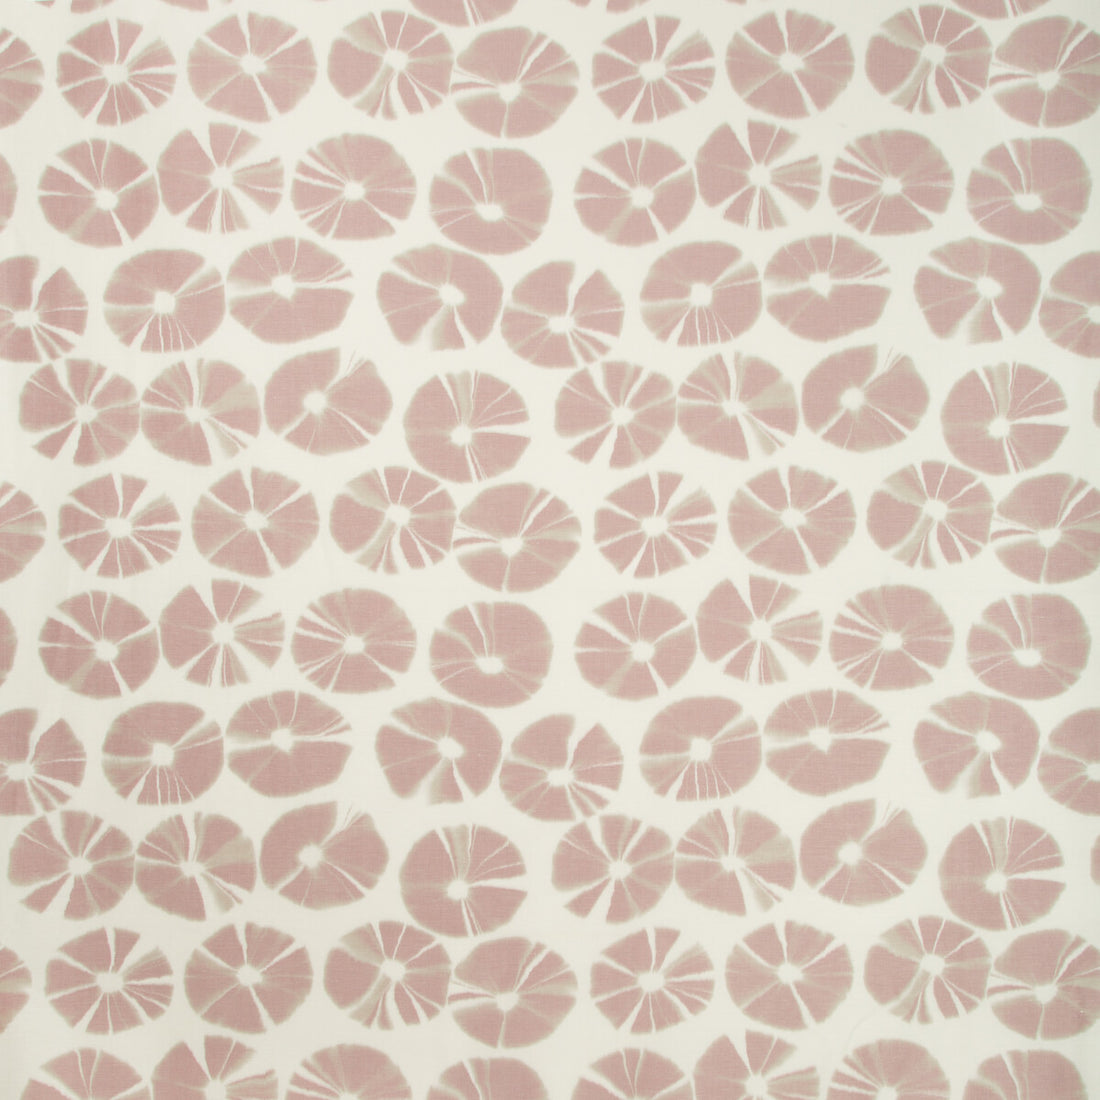 Echino fabric in blush color - pattern ECHINO.17.0 - by Kravet Couture in the Terrae Prints collection